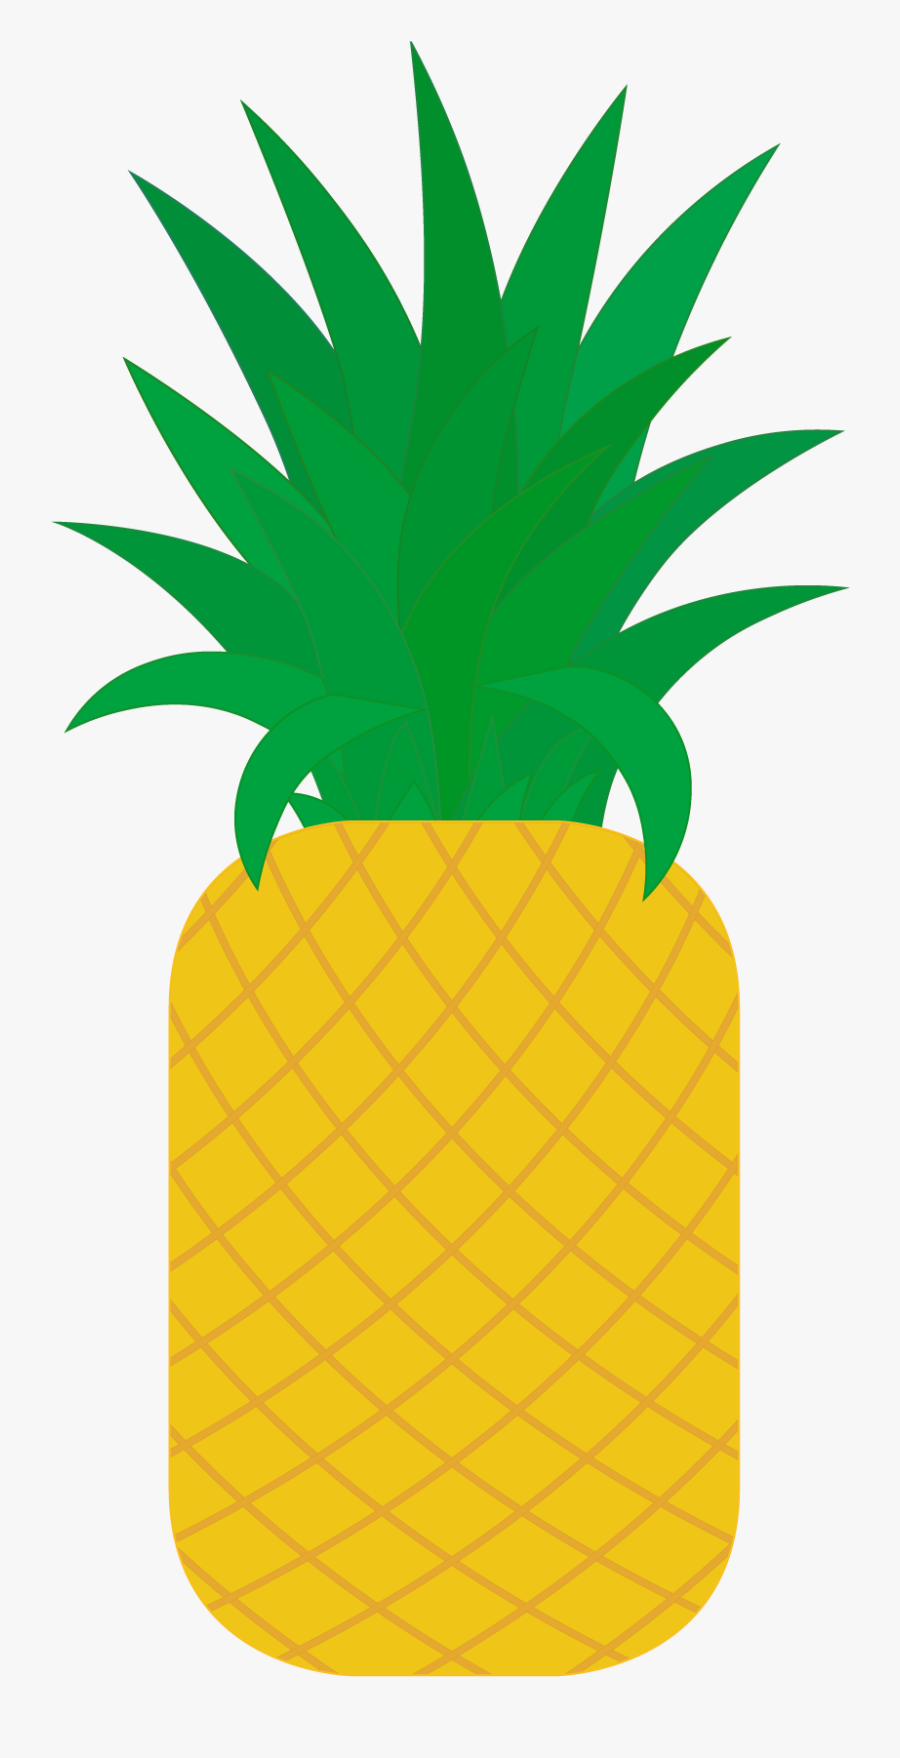 Flat Pineapple Poster Tropical Fruit Png And Vector - Fruitpng Vector, Transparent Clipart